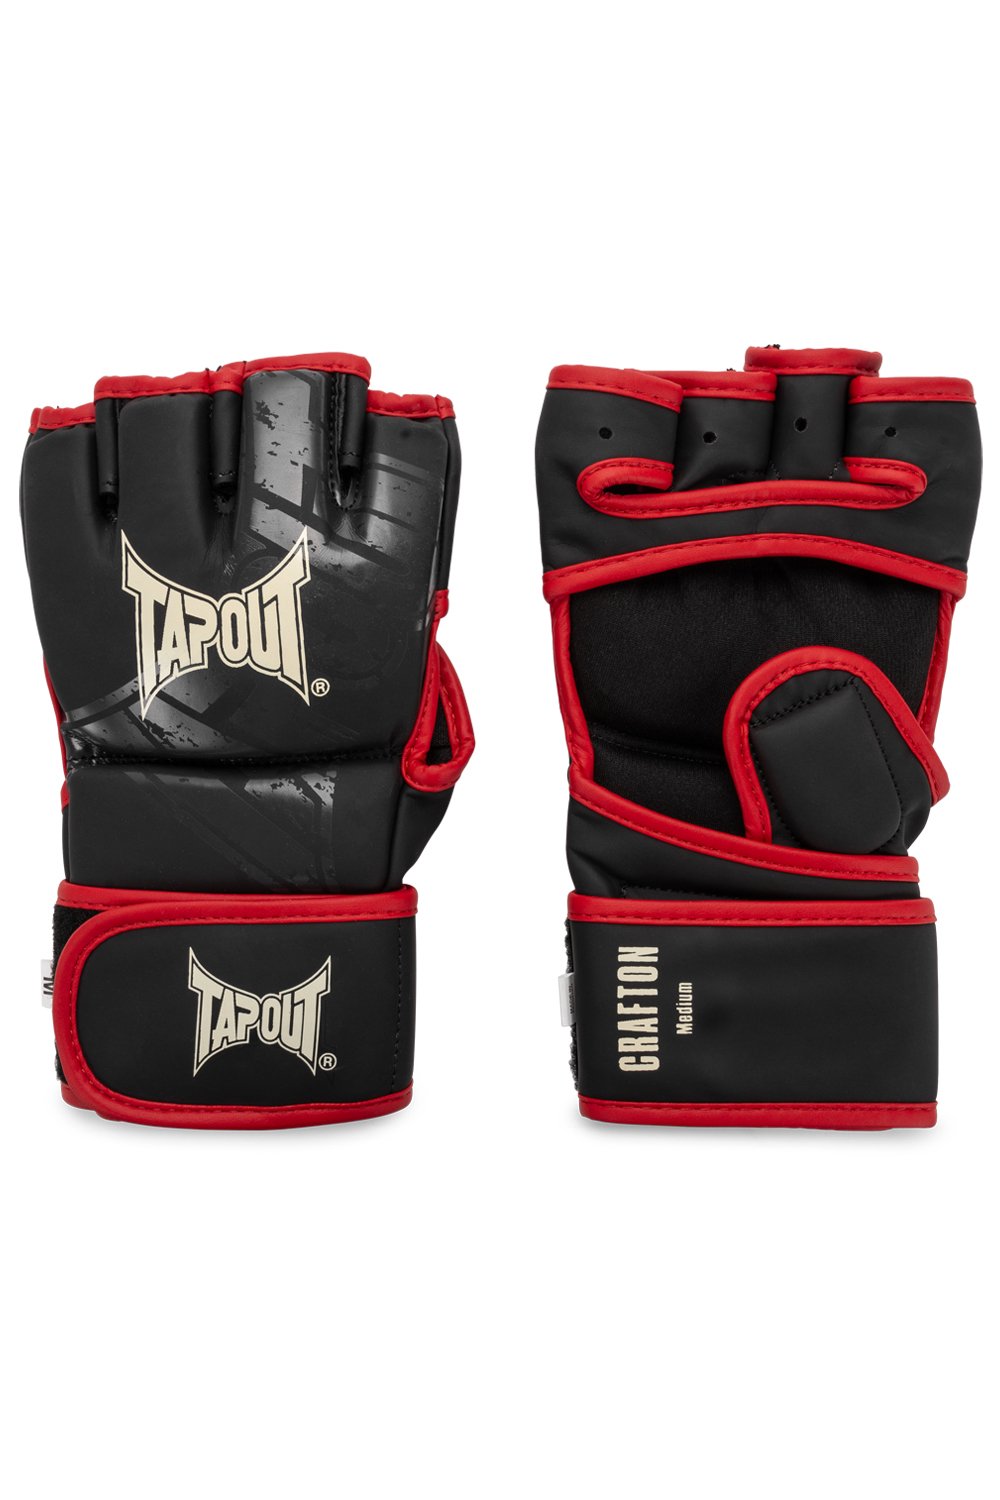 Levně Tapout Artificial leather MMA sparring gloves (1 pair)